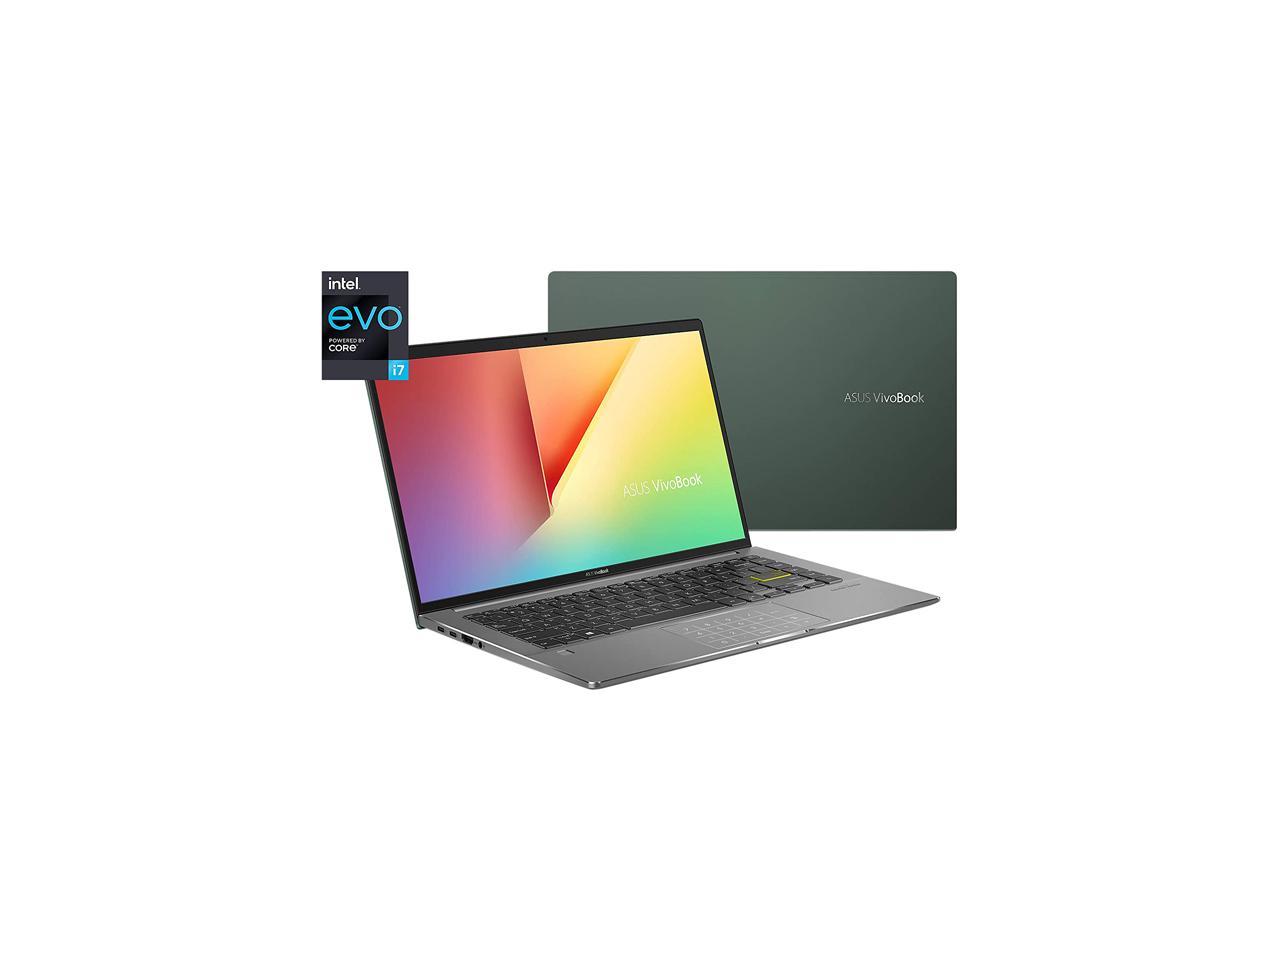 ASUS VivoBook S14 Laptop is on sale for  $544.49  at Newegg.